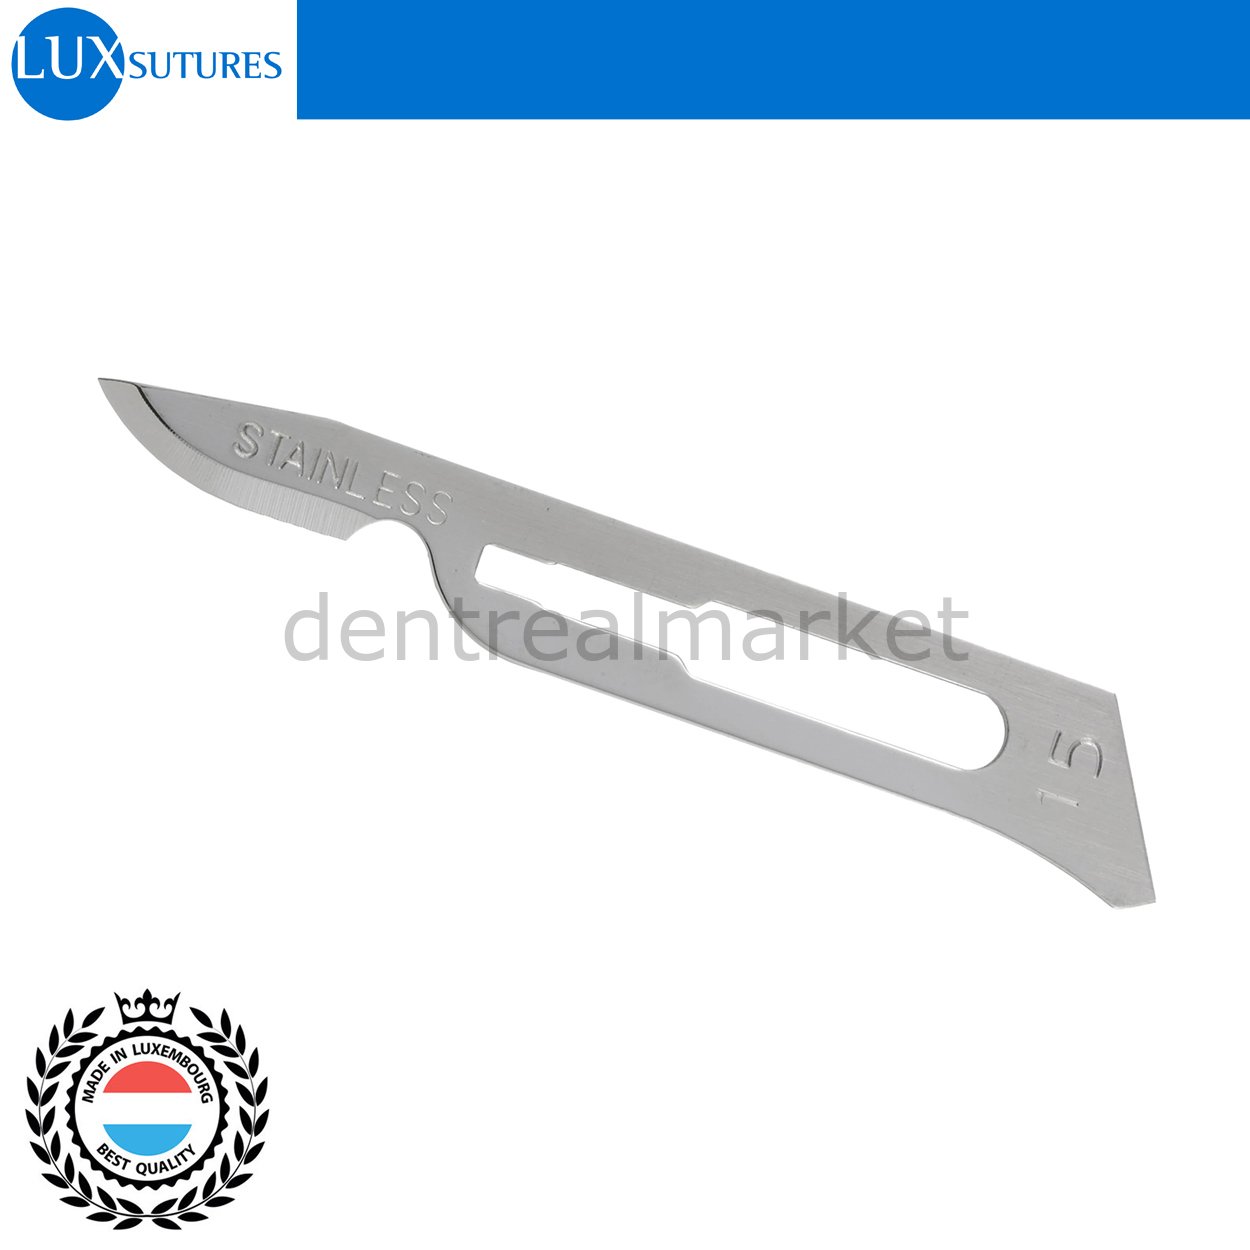 Surgical Scalpel Sterile Blades Tip 15C - 5 Box Surgical Blade